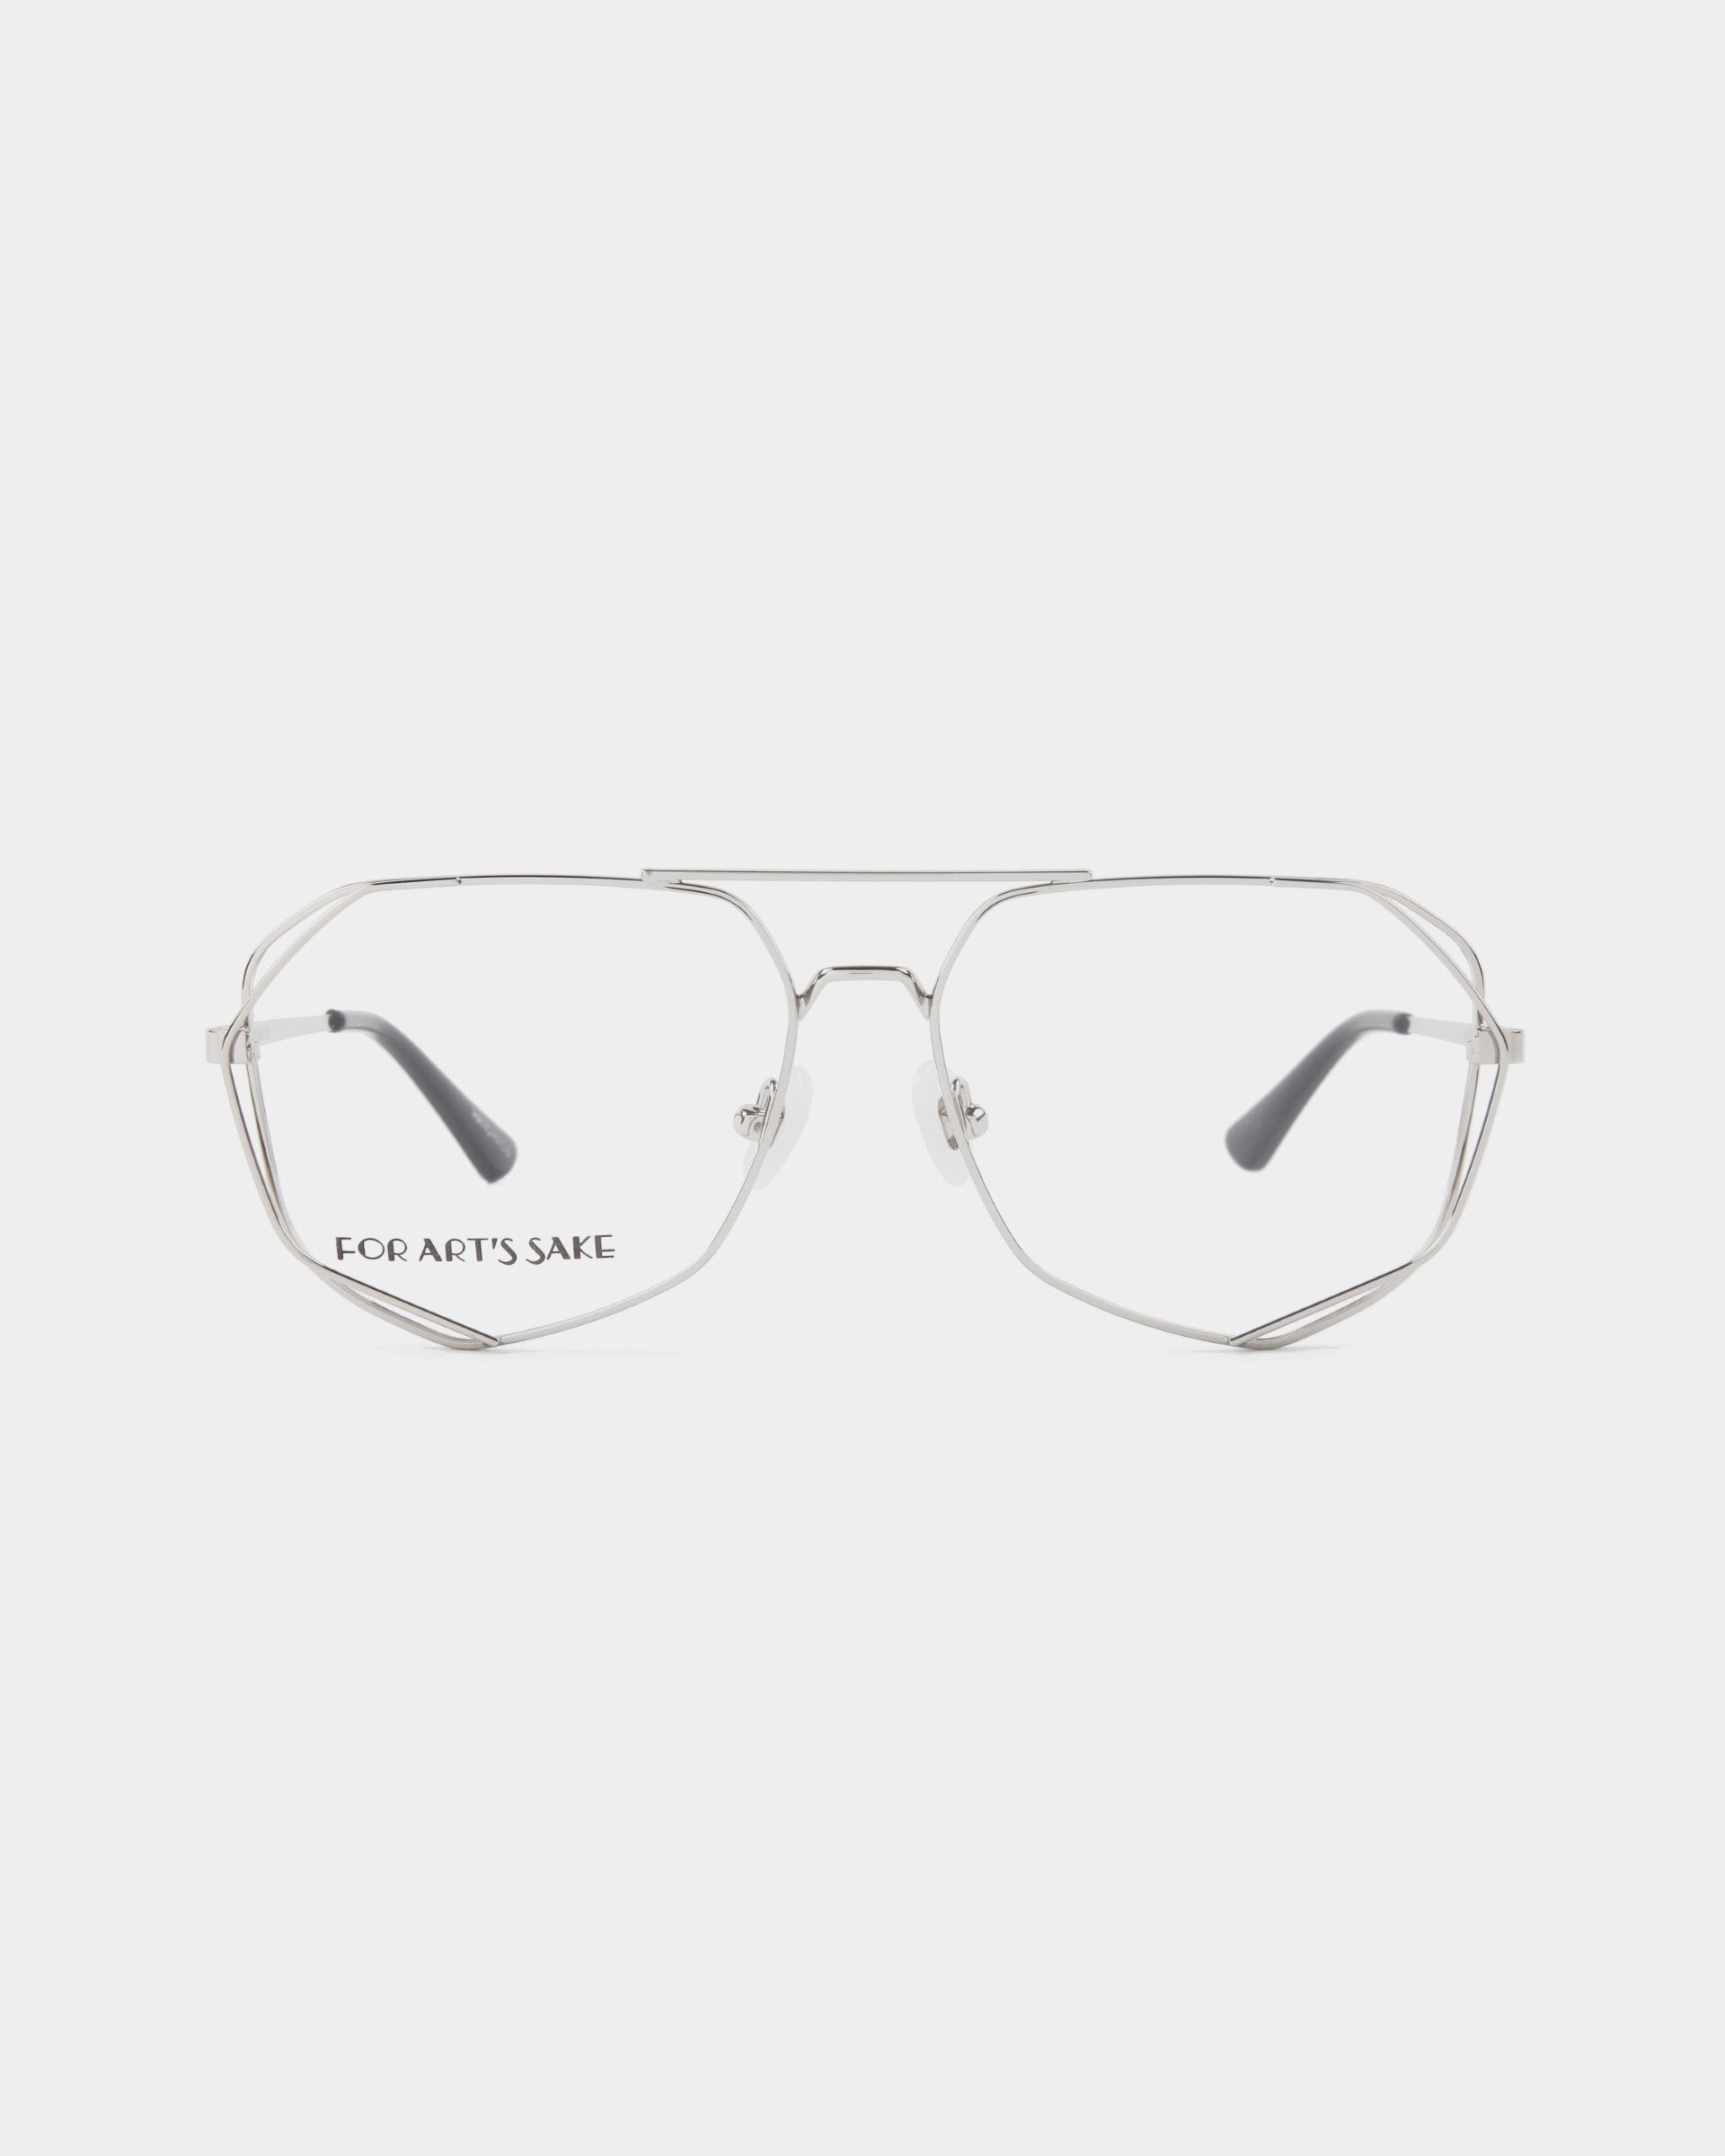 A pair of silver metal eyeglasses with thin, geometric stainless steel frames and clear lenses. The words &quot;FOR ART&#39;S SAKE&quot; are printed on the left lens. The glasses have adjustable nose pads and black ear tips. With a plain white background, these stylish specs offer a Blue Light Filter option for added protection. These are the Genius eyeglasses by For Art&#39;s Sake®.